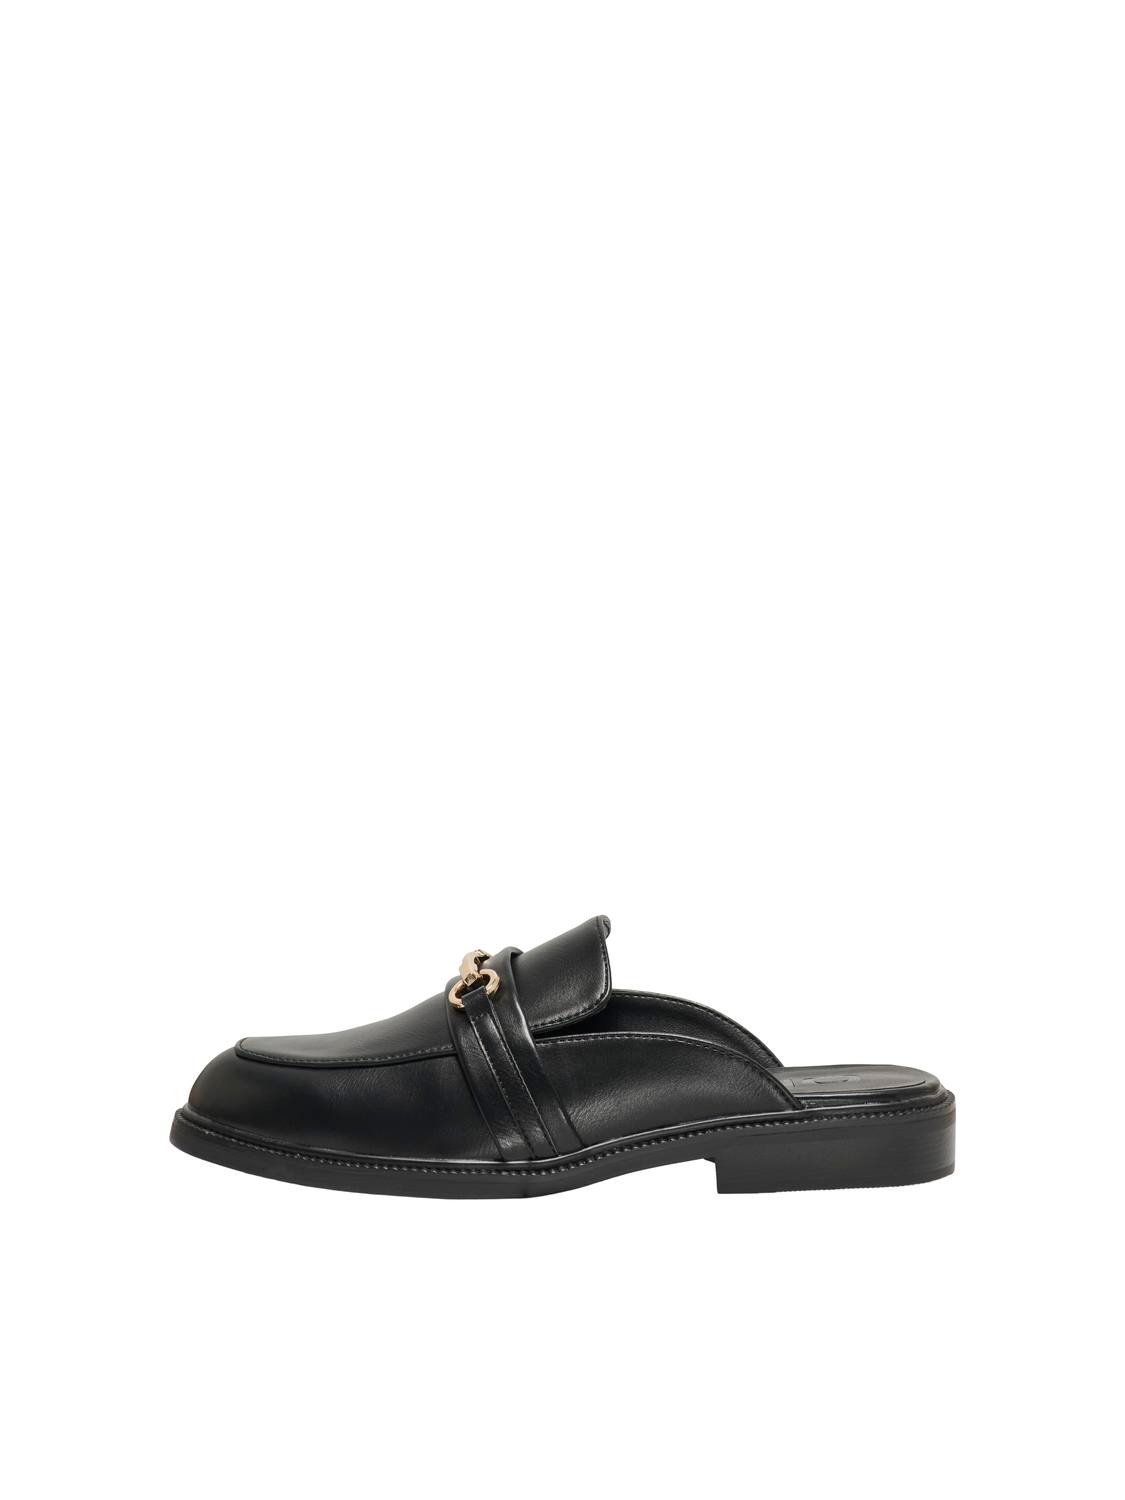 ONLY Other Shoes -Black - 15320060